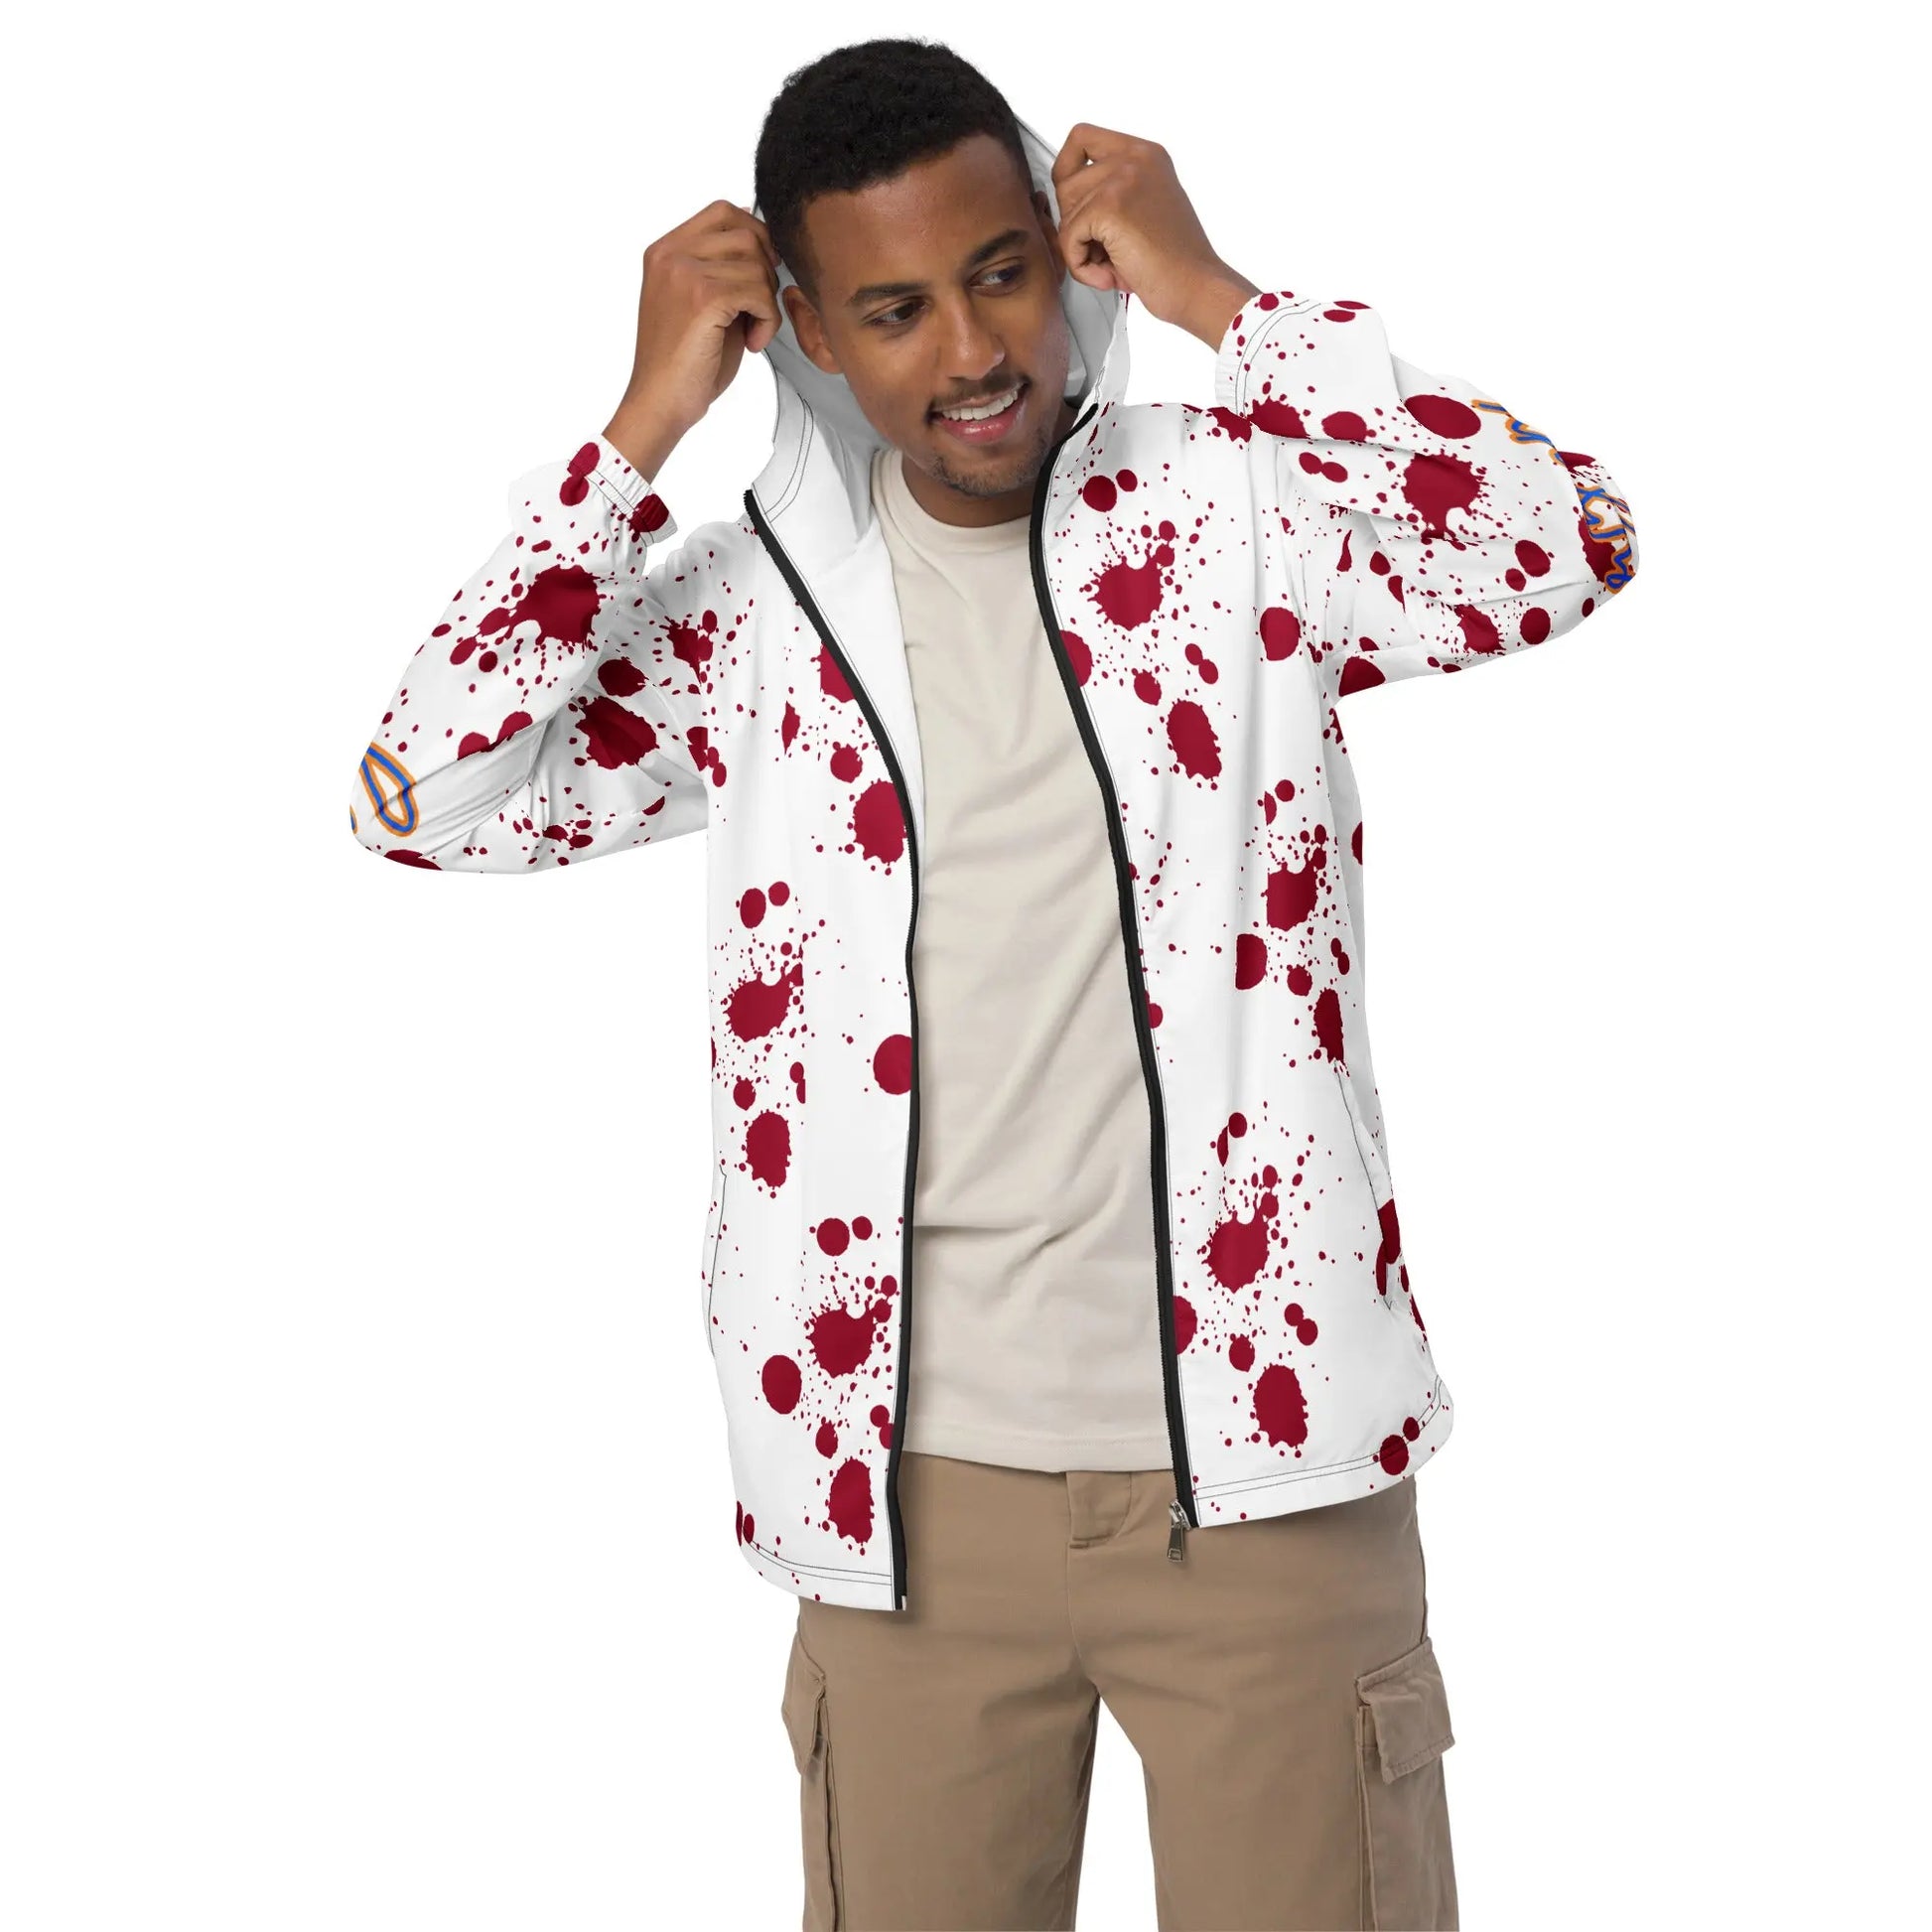 Wamarzon's Ghosted Men’s windbreaker - Image #4